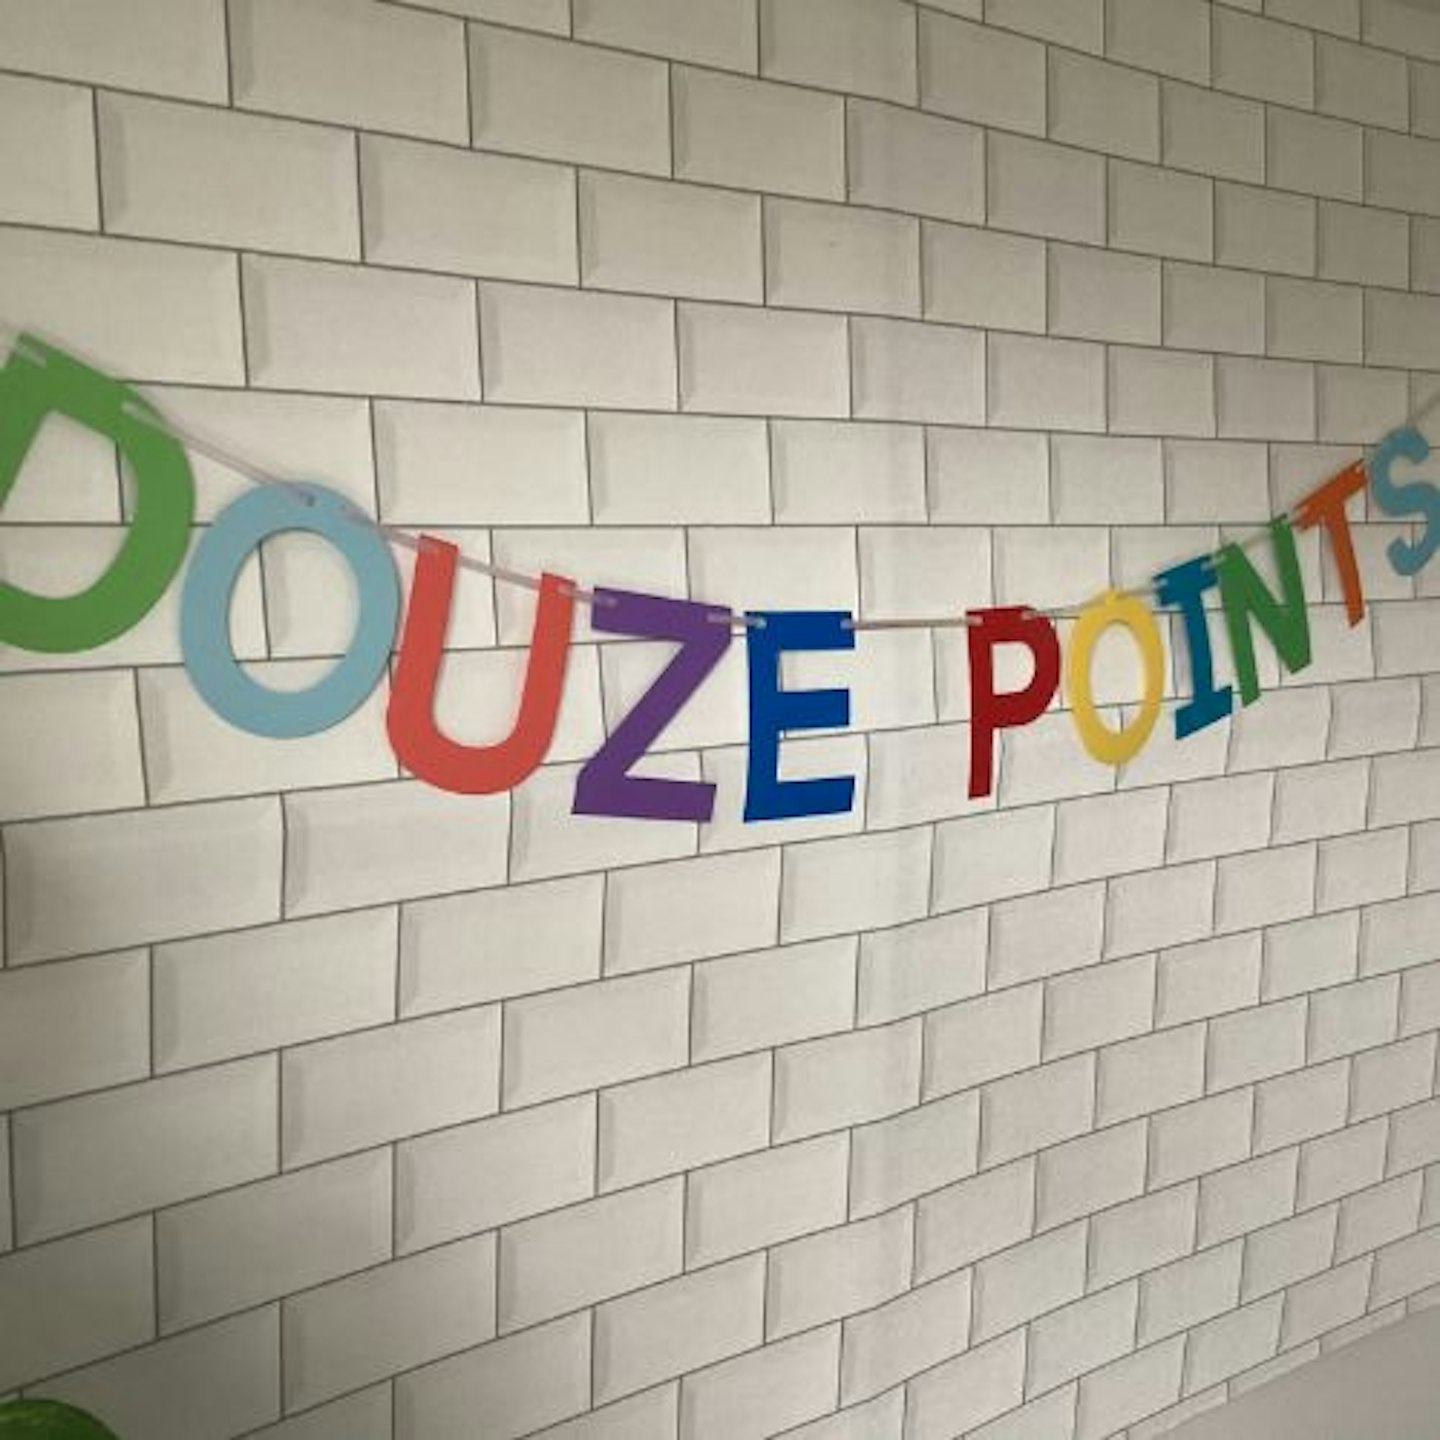 Eurovision Party Douze Points Celebration Banner Bunting